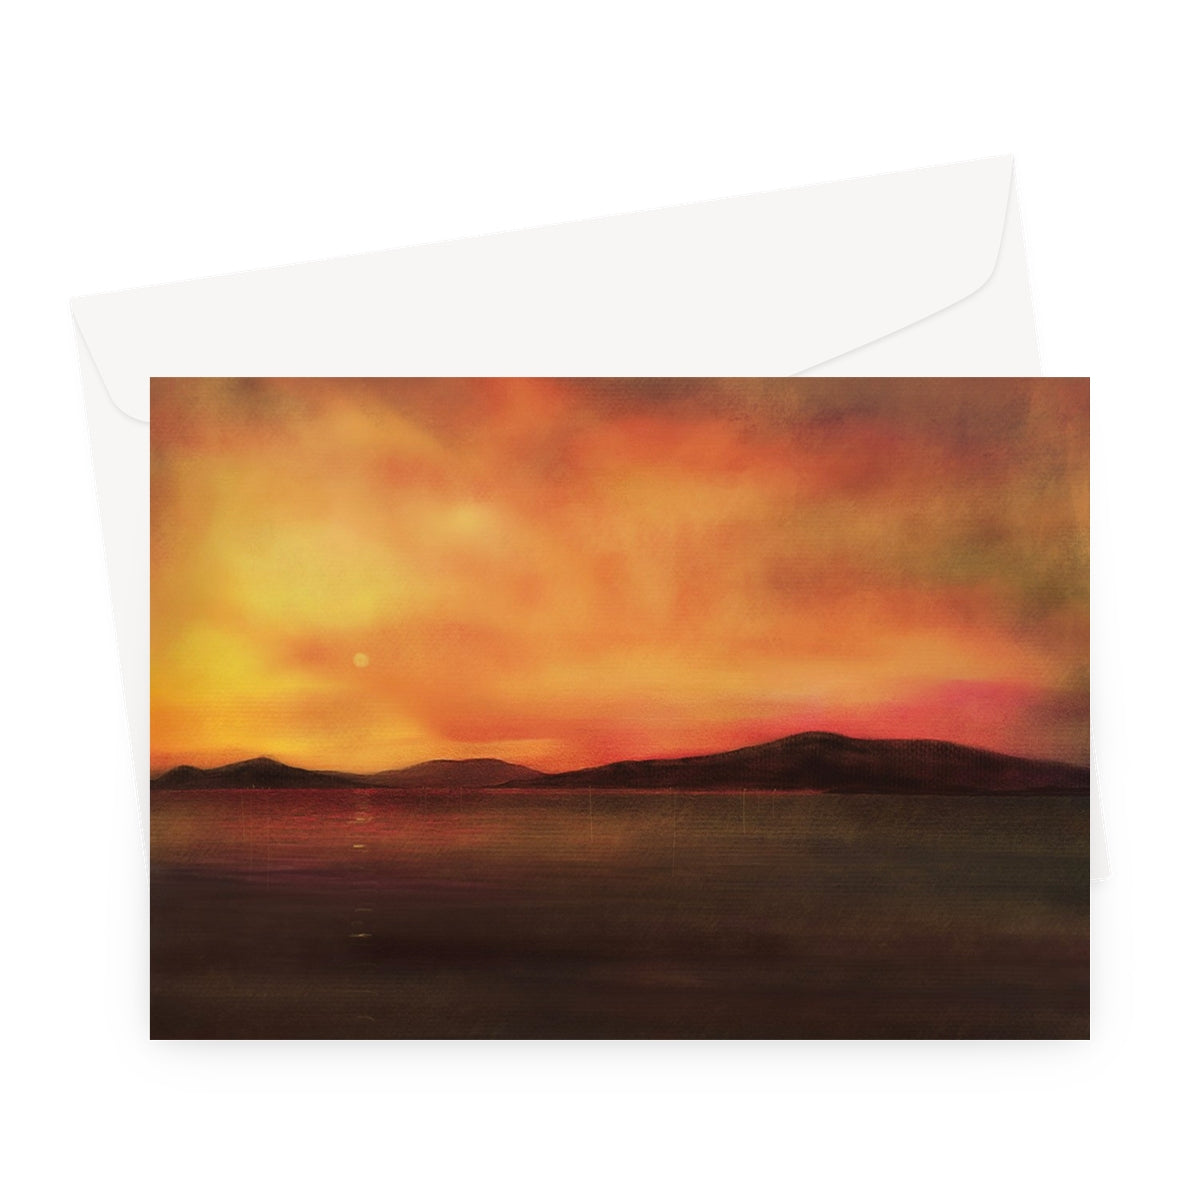 Harris Sunset Art Gifts Greeting Card-Greetings Cards-Hebridean Islands Art Gallery-A5 Landscape-10 Cards-Paintings, Prints, Homeware, Art Gifts From Scotland By Scottish Artist Kevin Hunter